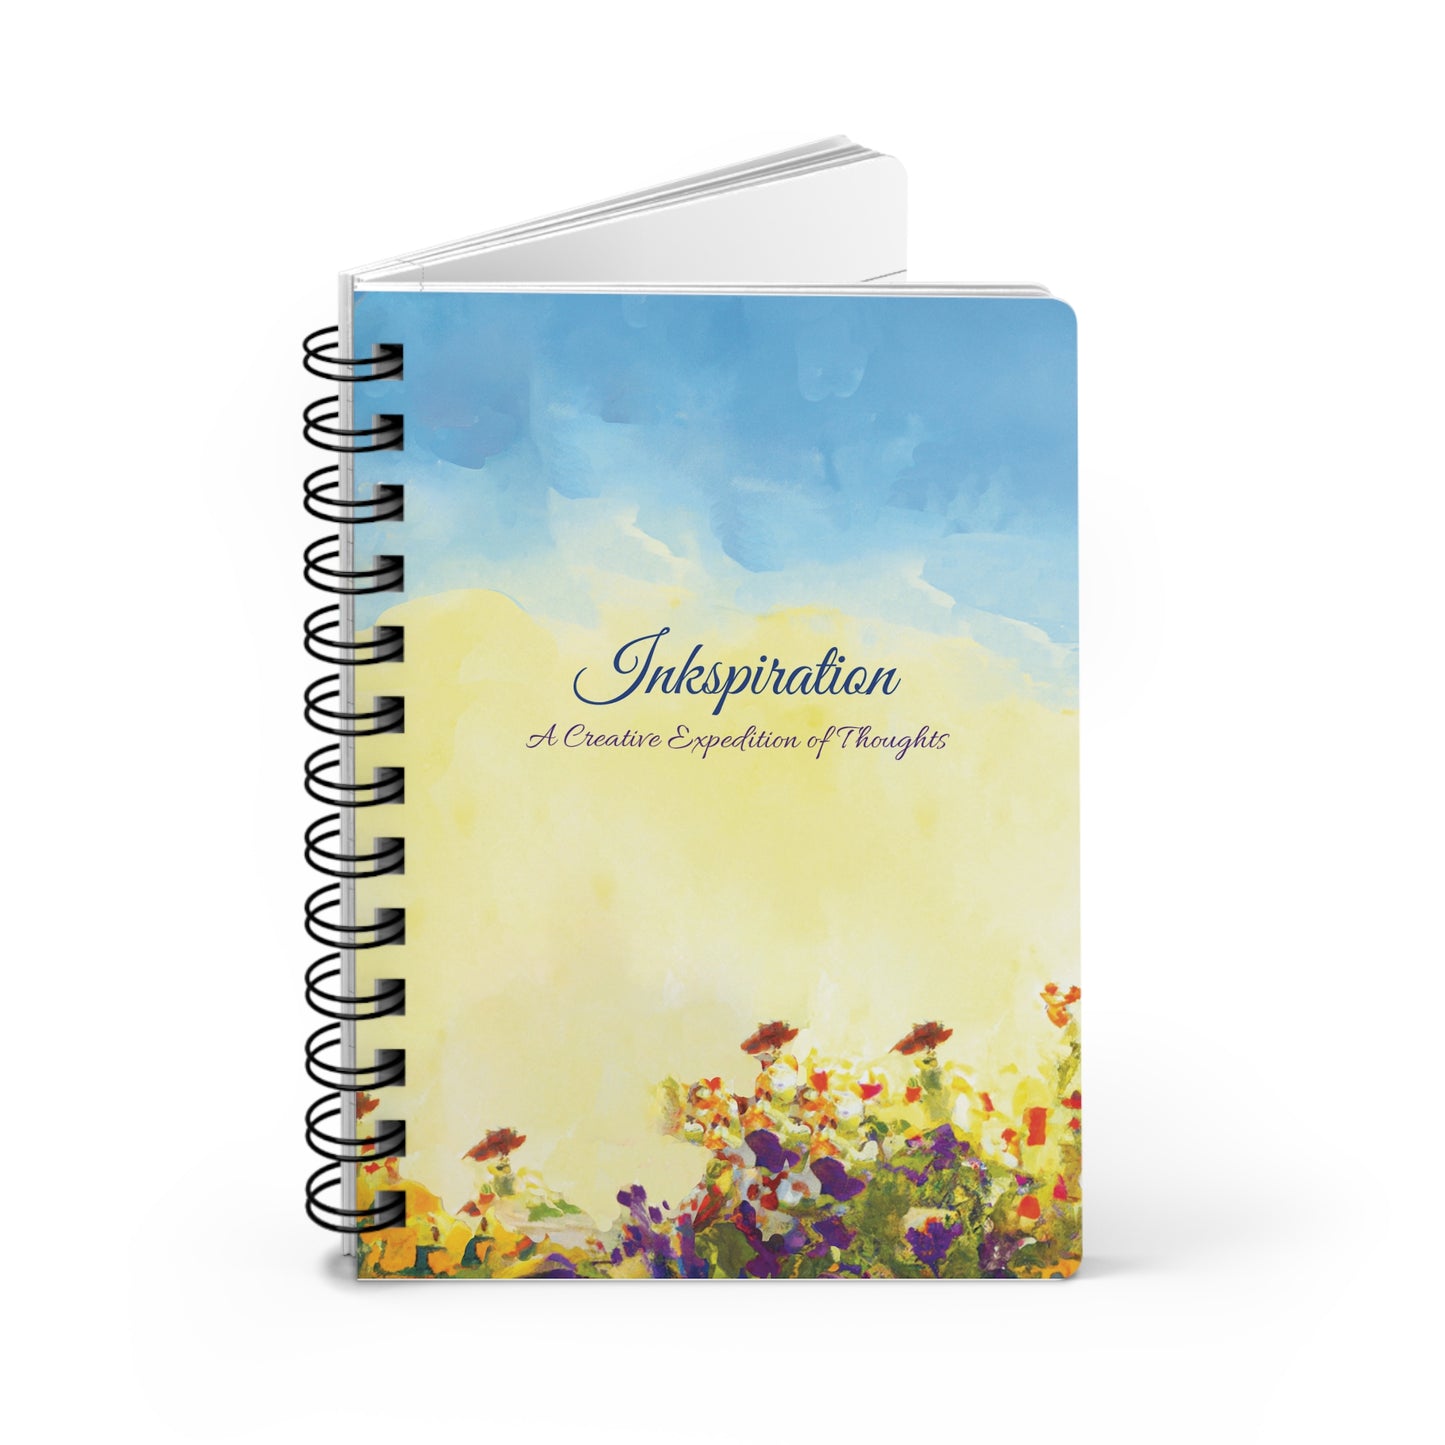 Inkspiration: A Creative Expedition of Thoughts" Spiral Bound Journal & Notebooks with 2023 -2024 Year-at-a-glance calendar